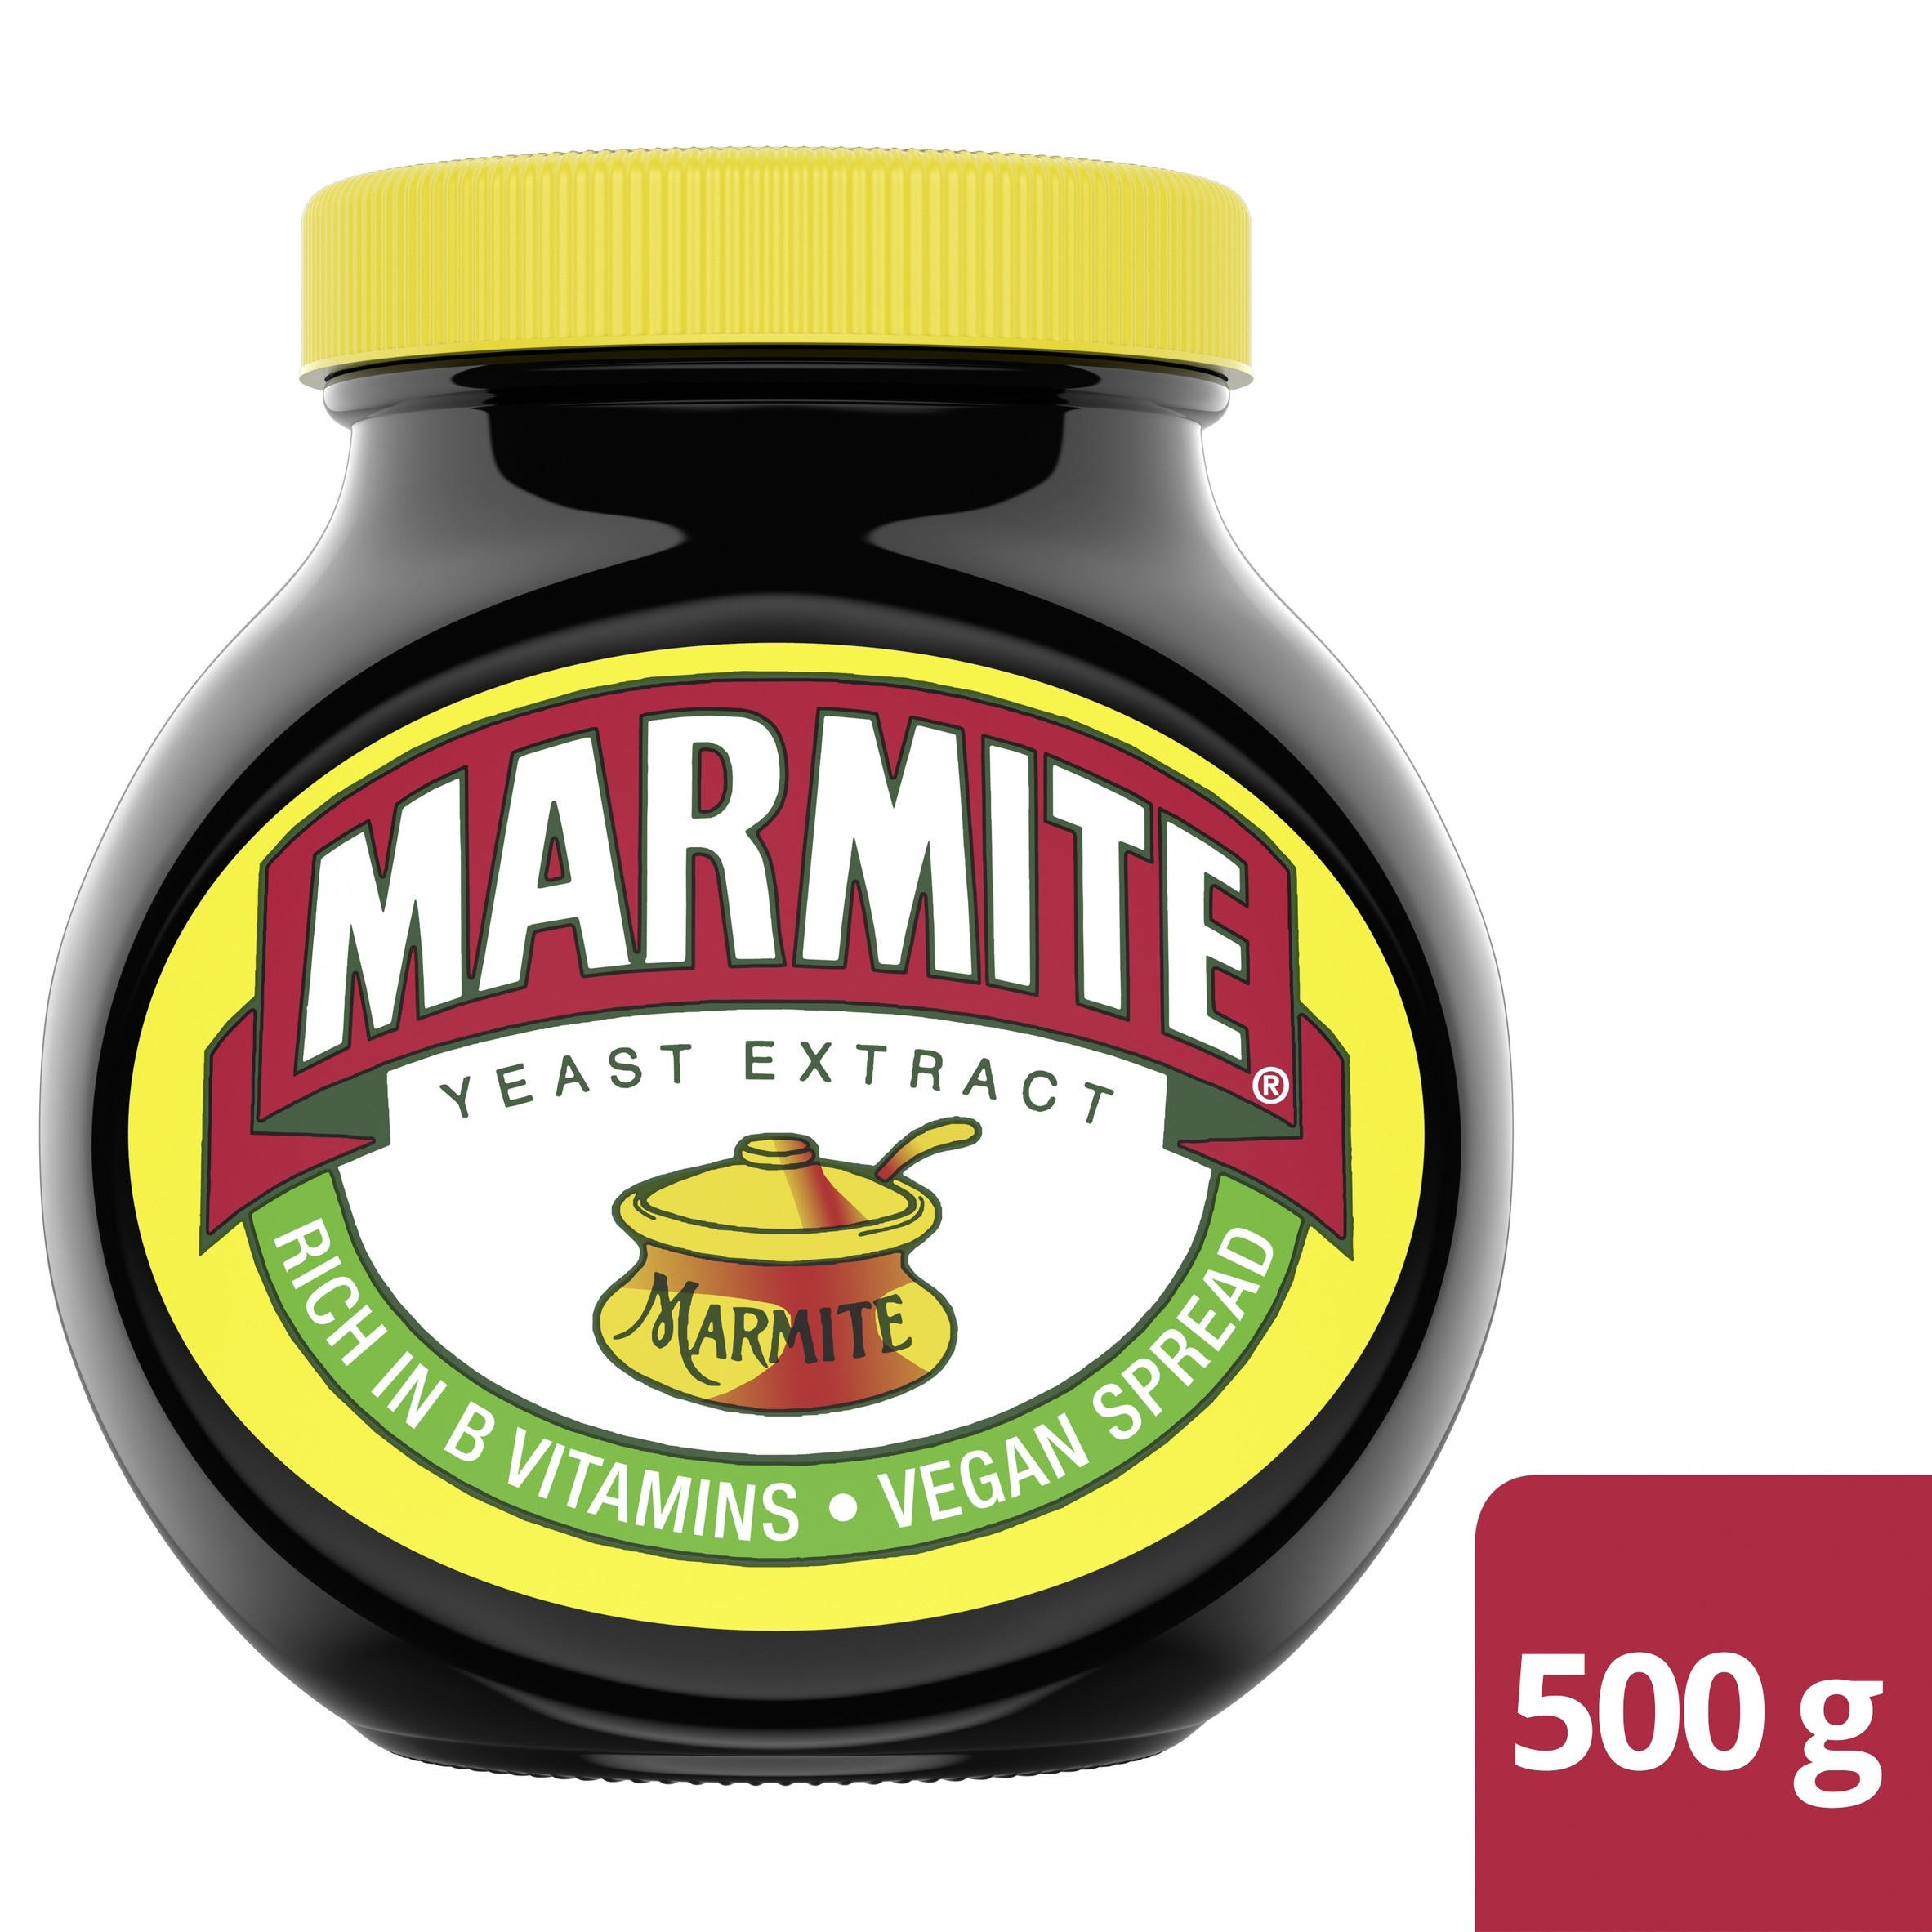 Marmite Yeast Extract Squeezy 200 Gram Jars by Marmite